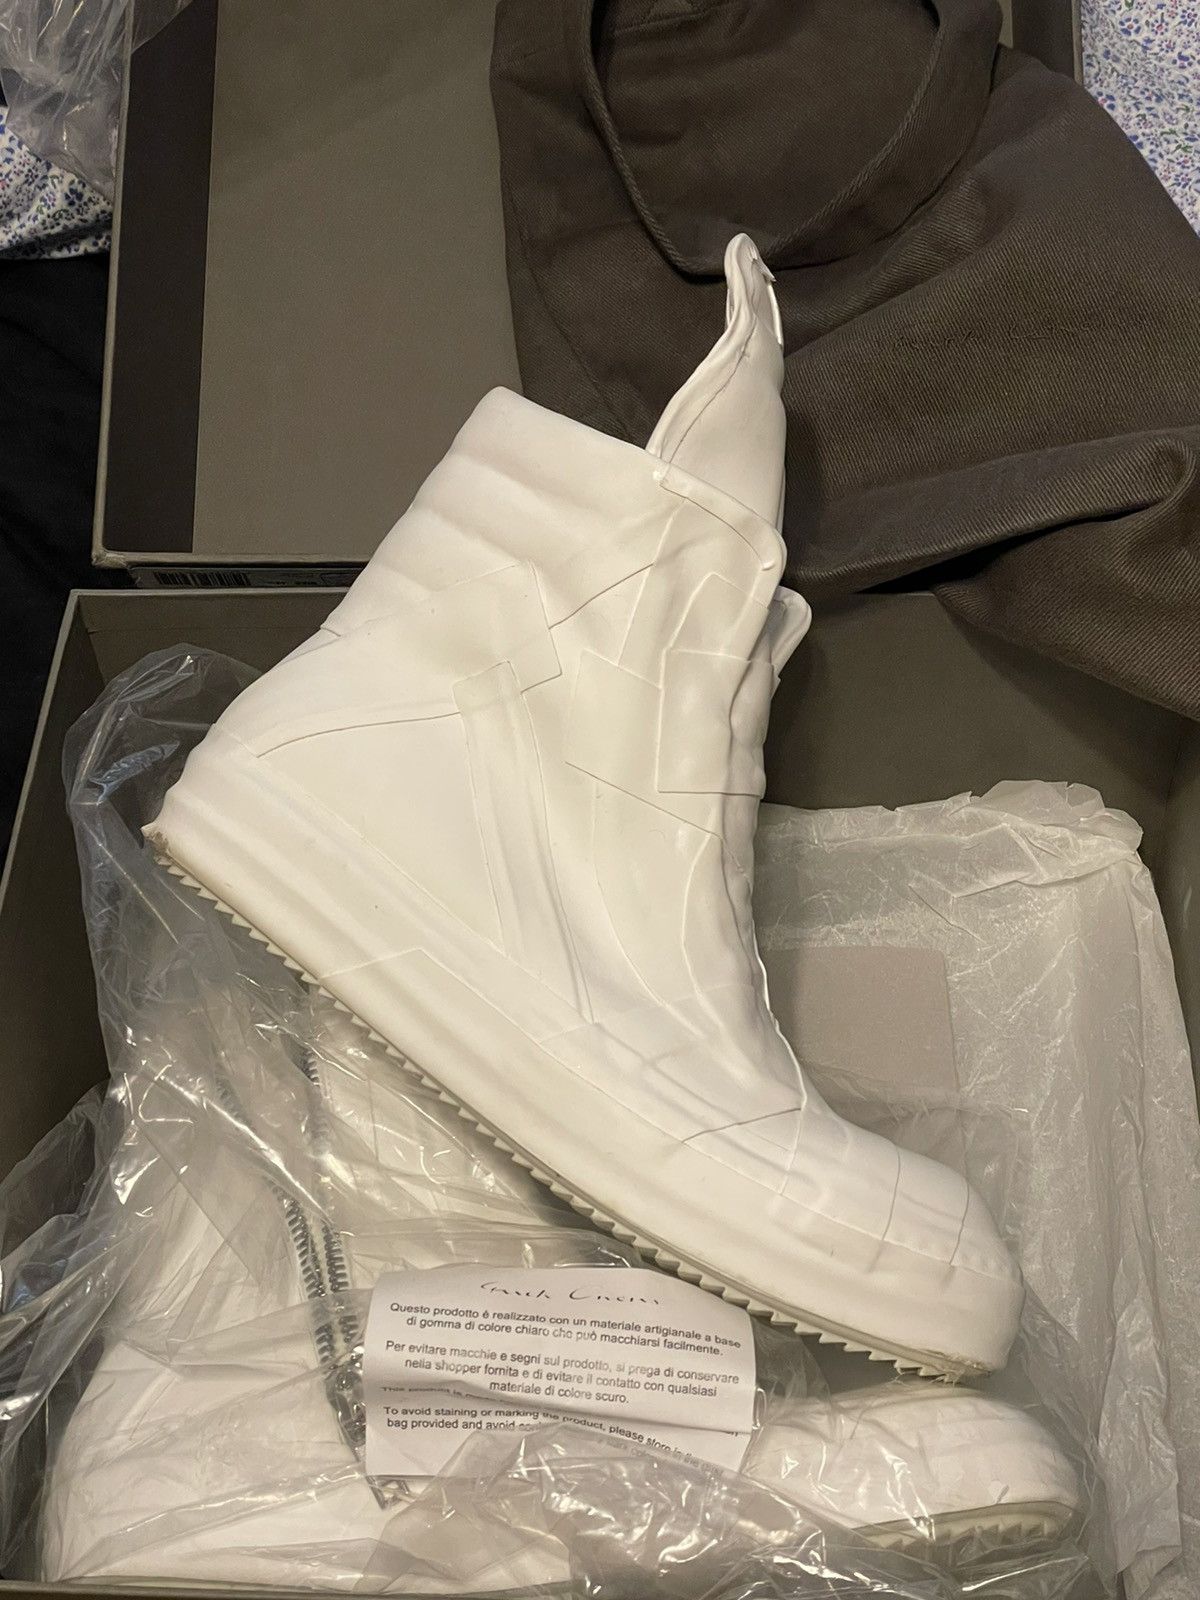 Rick Owens Performa Rubber Taped Geobasket | Grailed